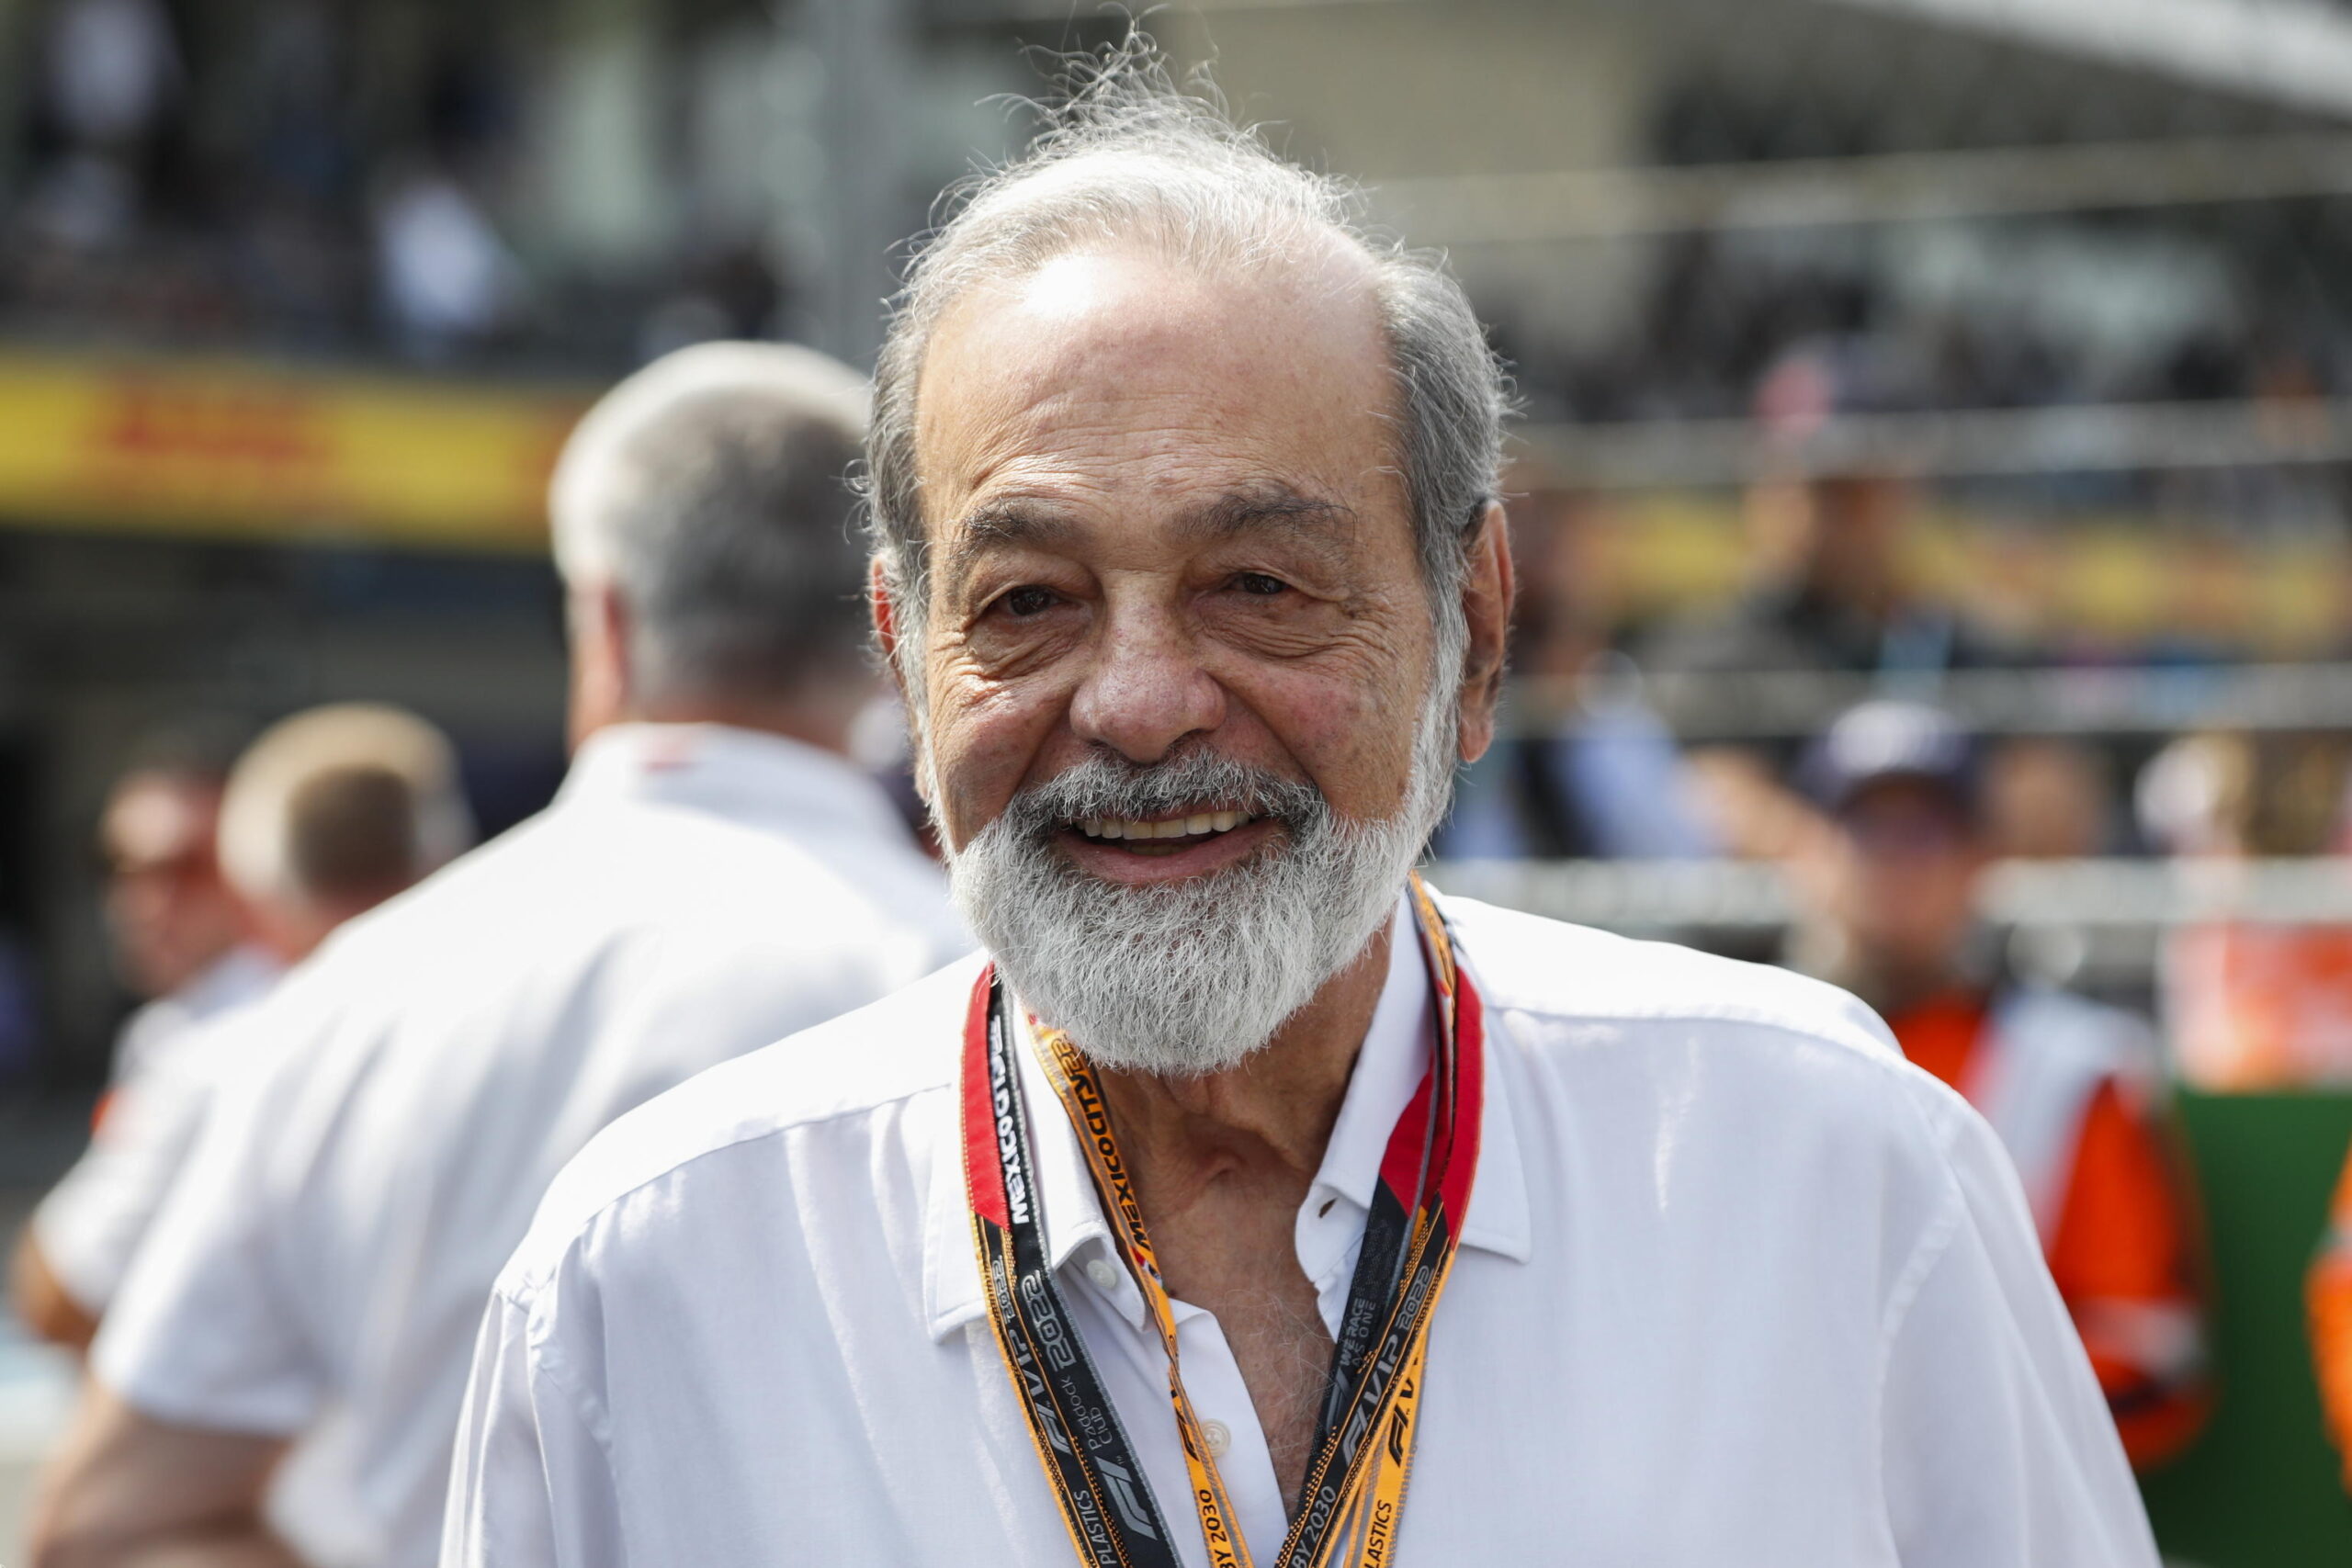 epa10275897 Mexican businessman Carlos Slim attends the race of the Formula One Grand Prix of Mexico City at the Circuit of Hermanos Rodriguez in Mexico City, Mexico, 30 October 2022. The Formula One Grand Prix of the Mexico City takes place on 30 October 2022 at the Circuit of Hermanos Rodriguez.  EPA/Mario Guzman